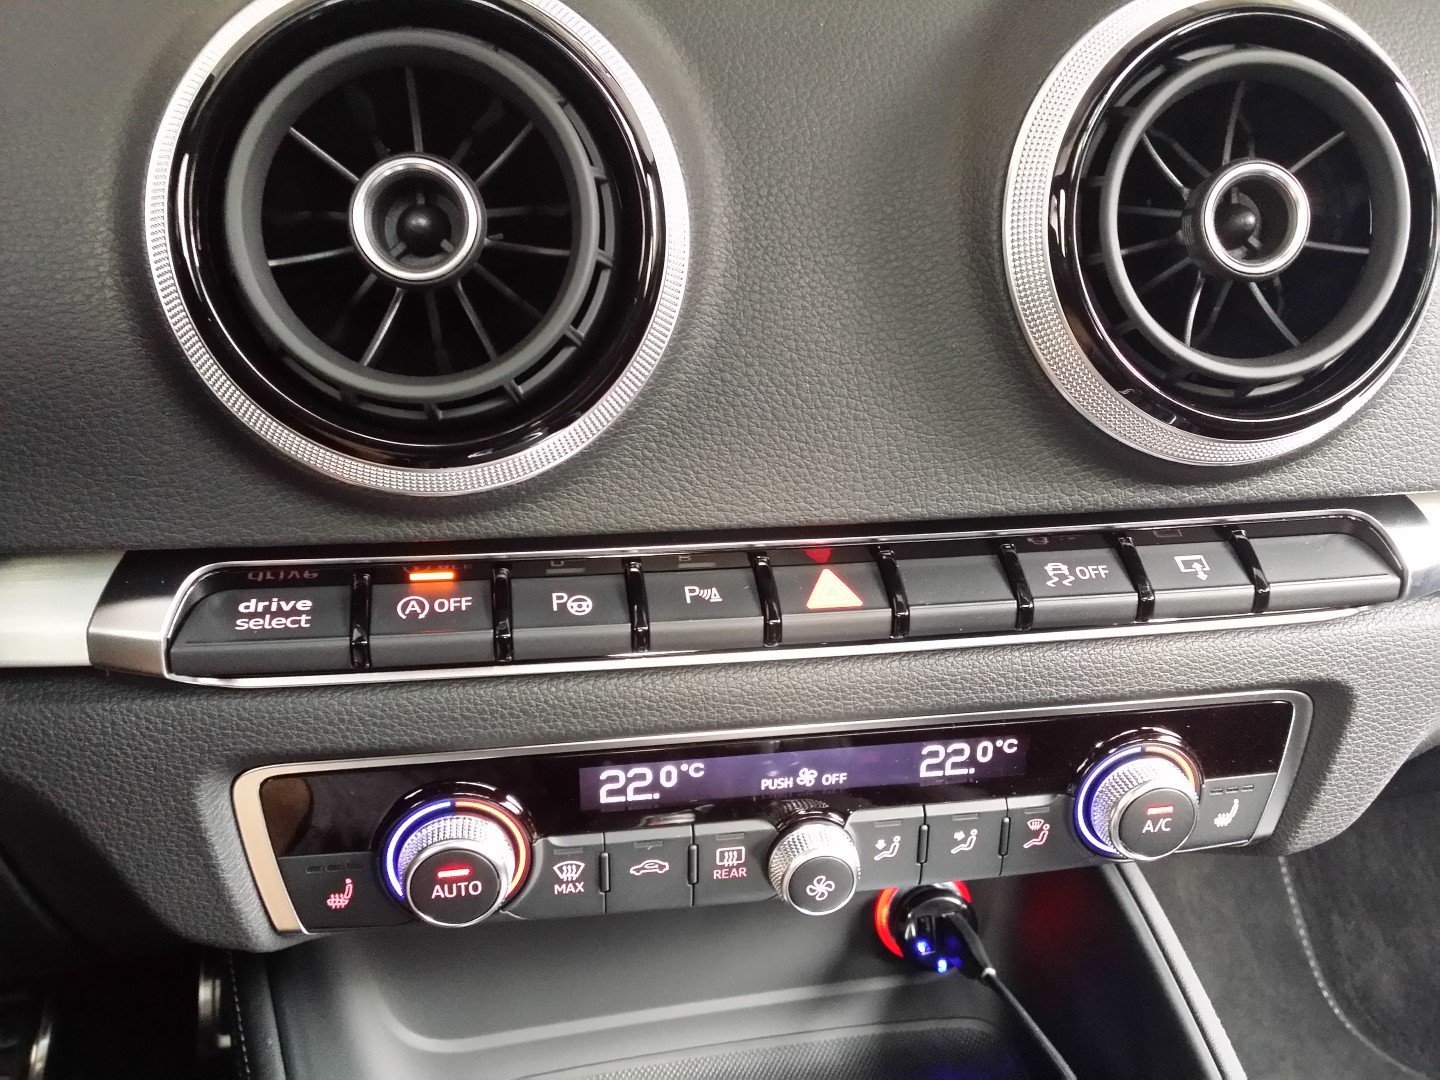 What dash buttons are these? | Audi-Sport.net